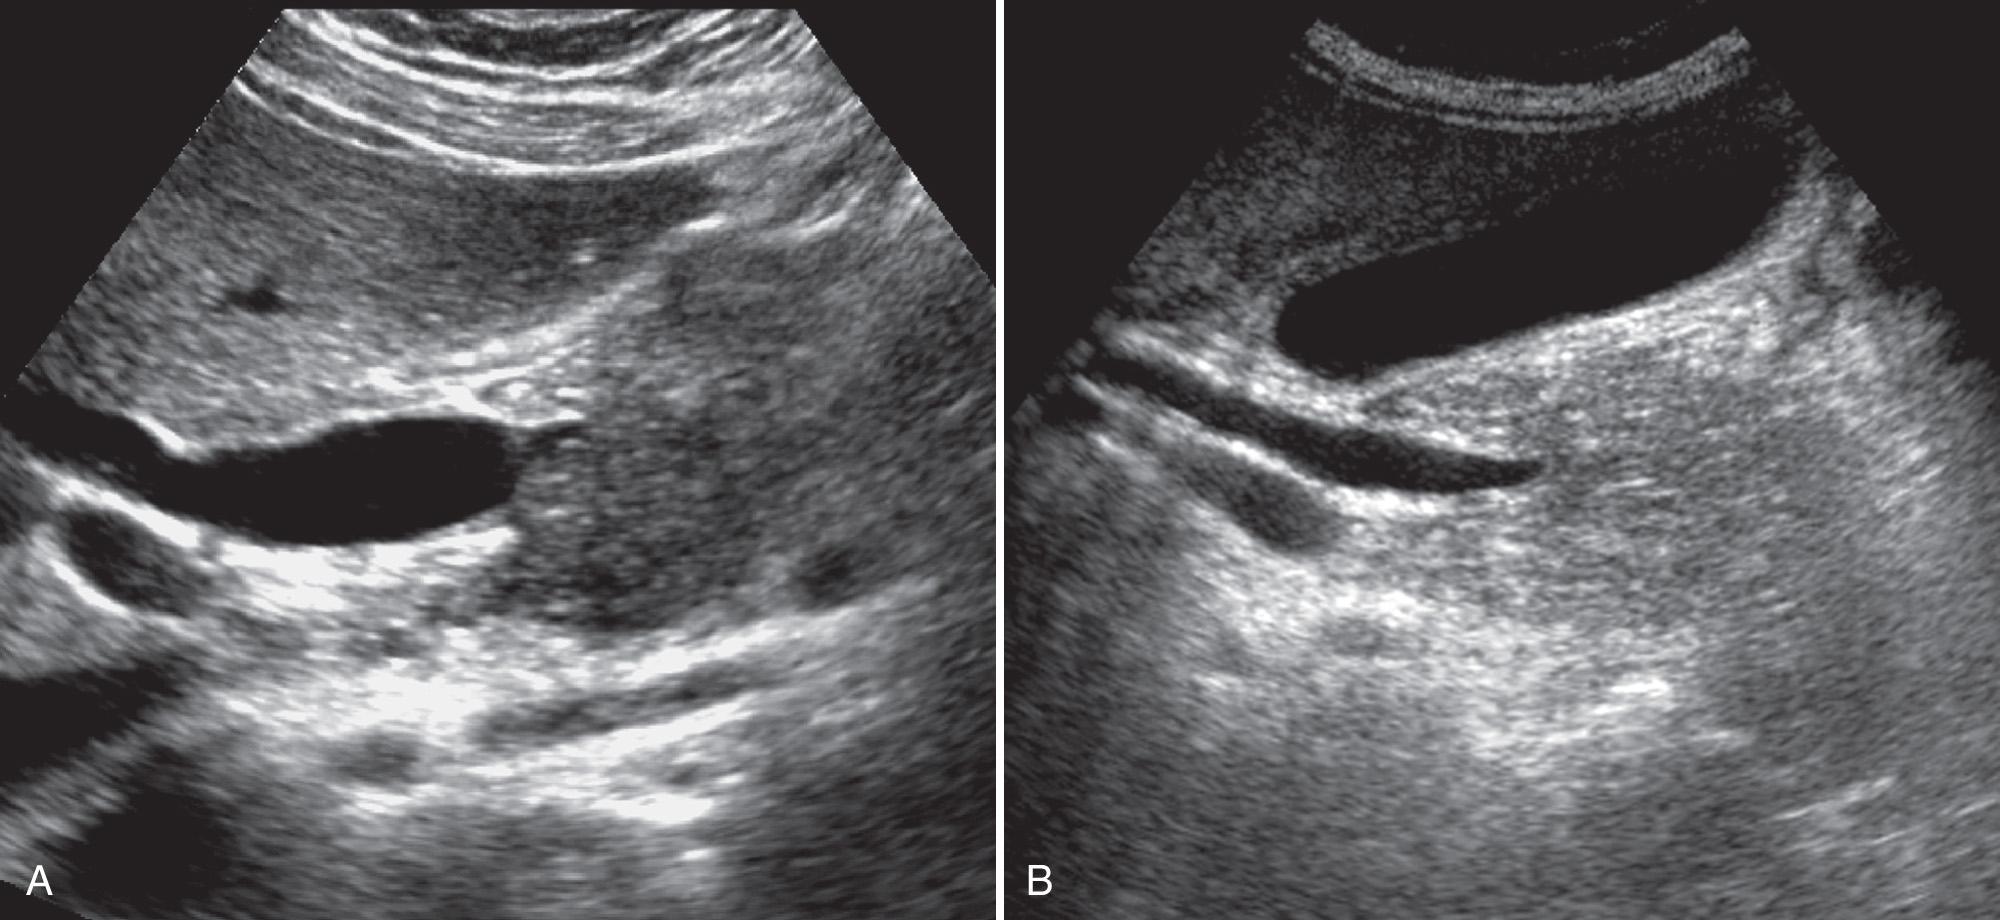 FIG. 6.9, Common Bile Duct Obstruction Caused by Extrinsic Factors.